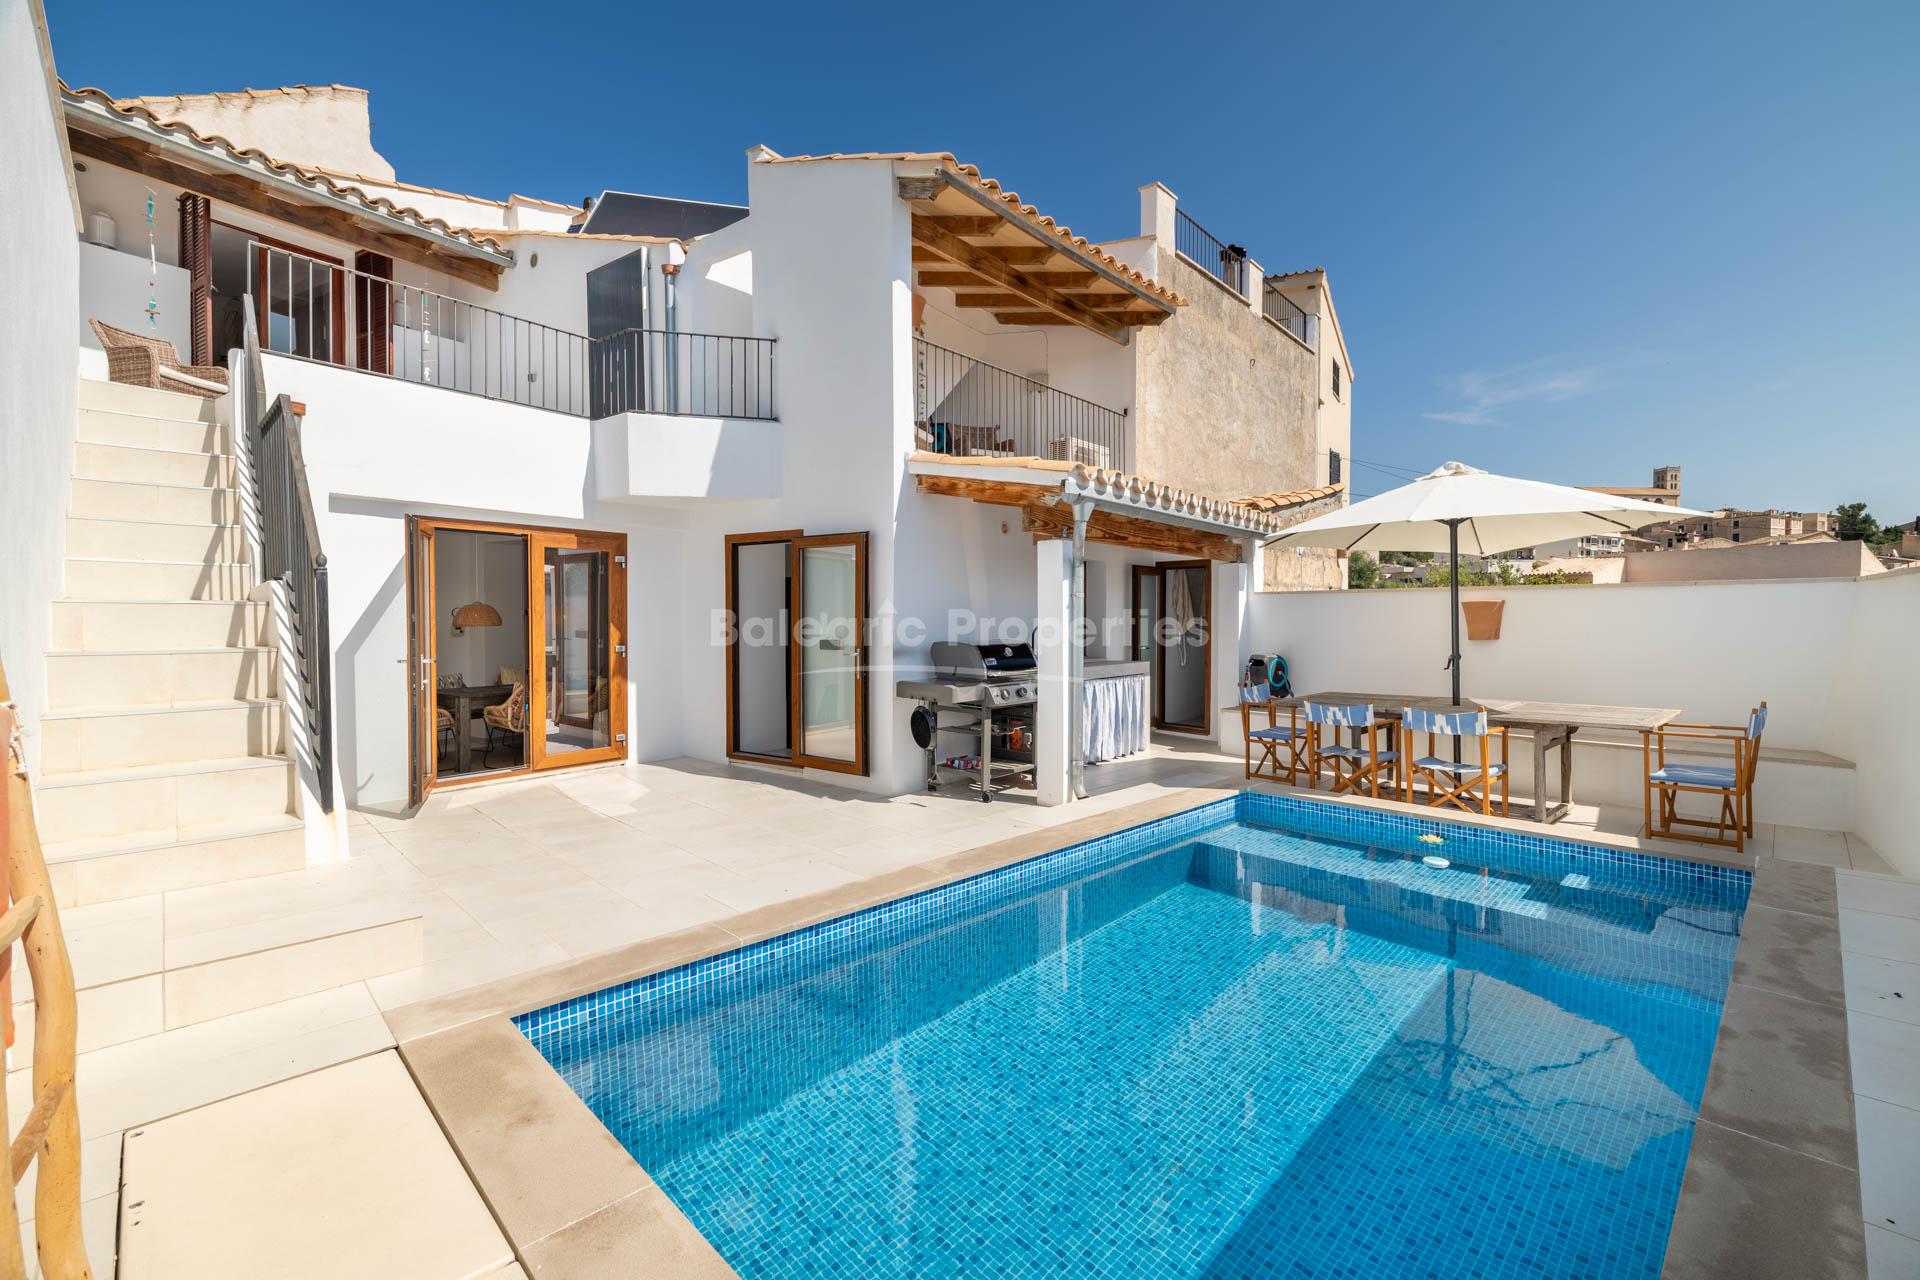 Refurbished town house with private pool for sale in Selva, Mallorca